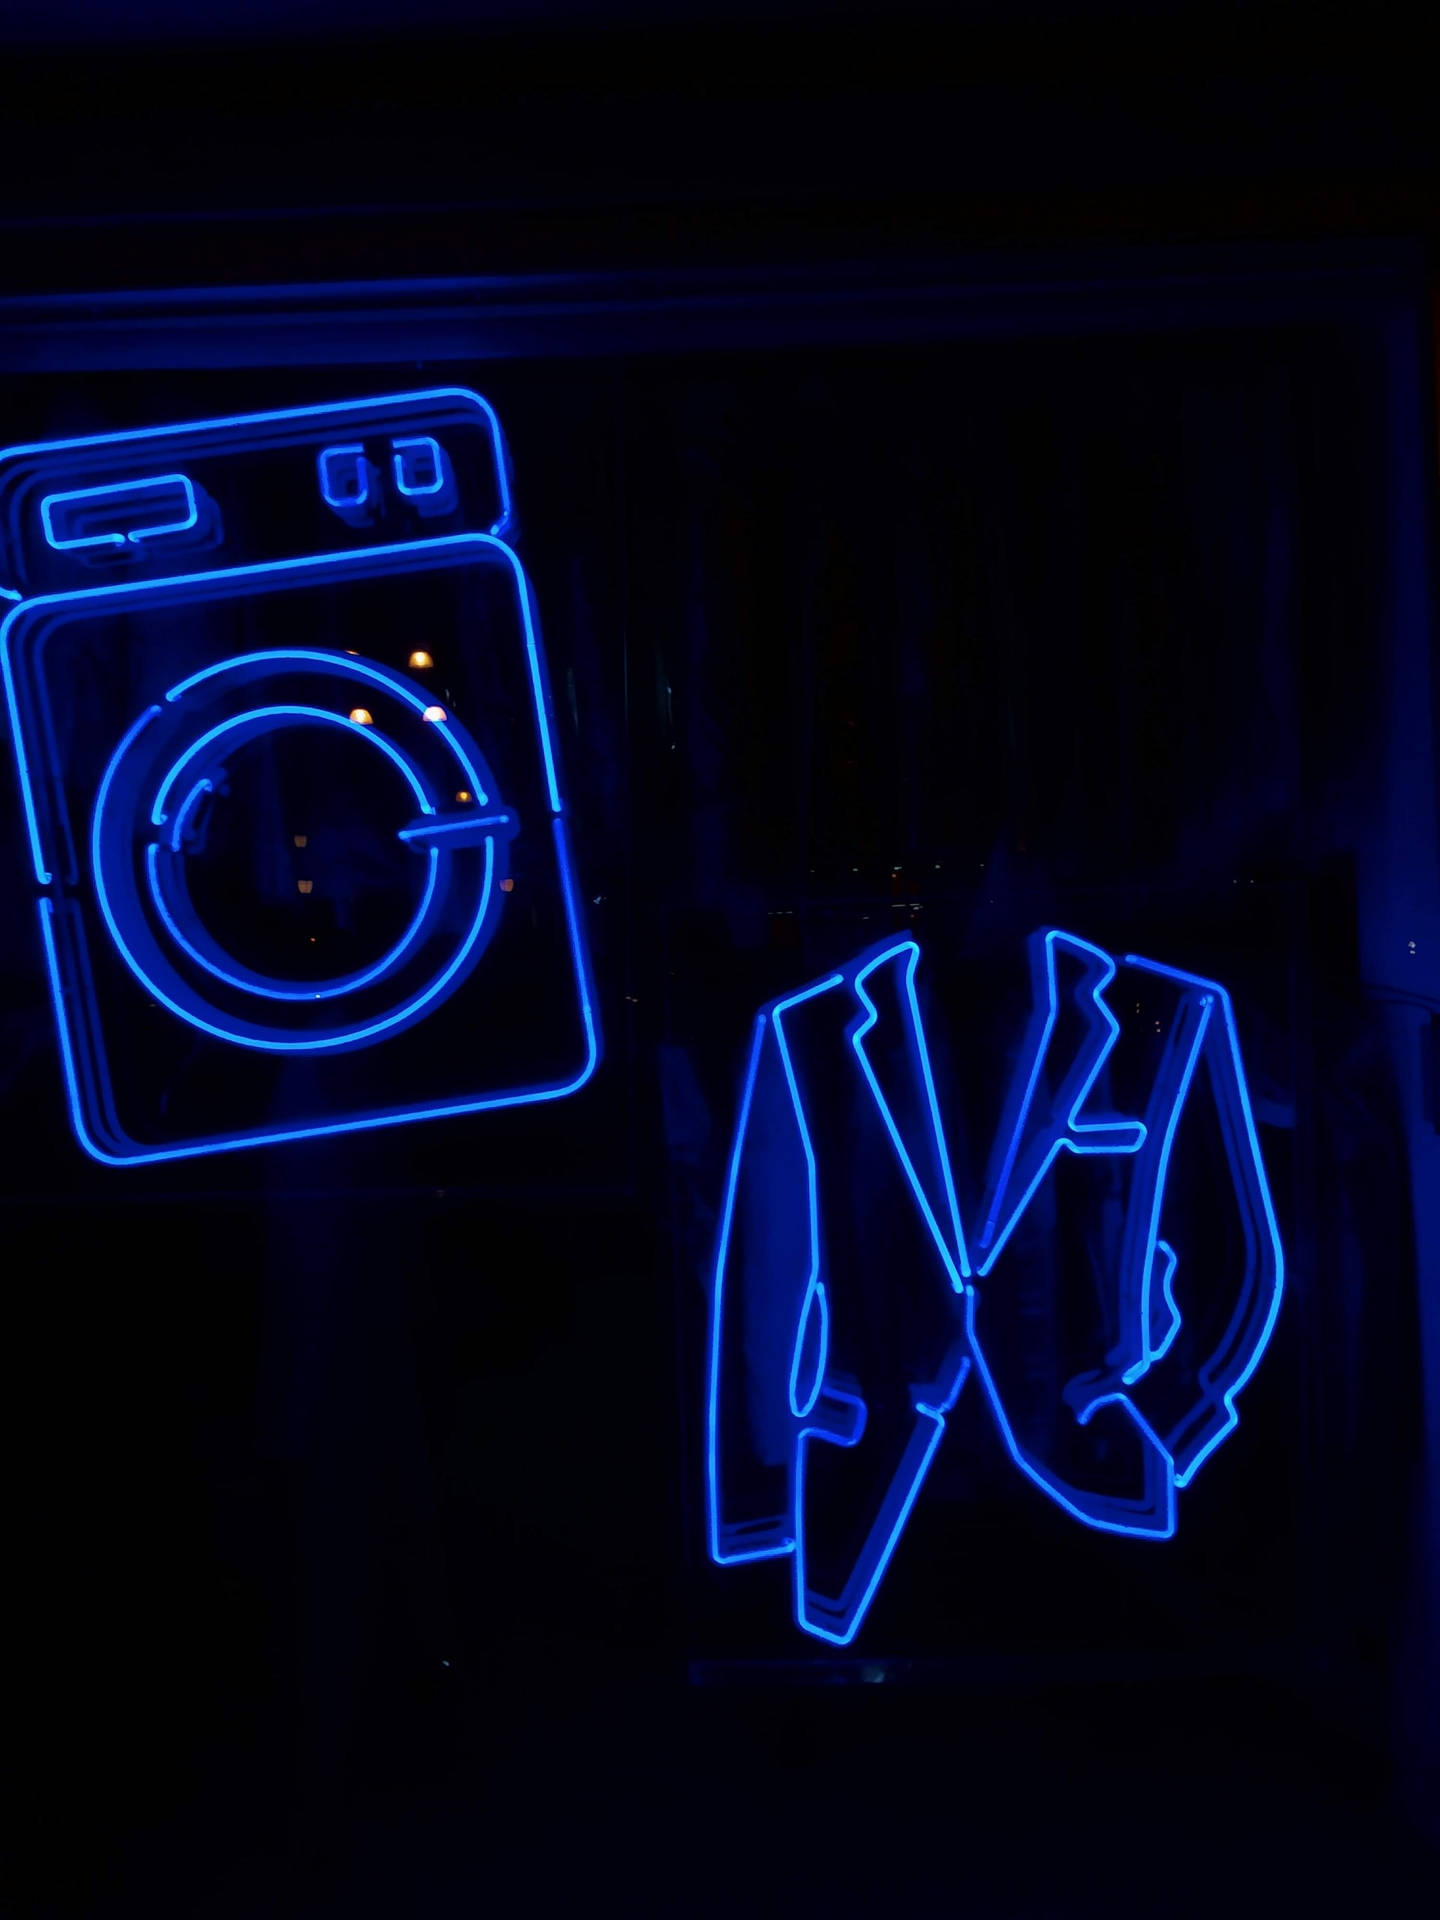 Laundry Signage In Neon Blue iPhone Wallpaper